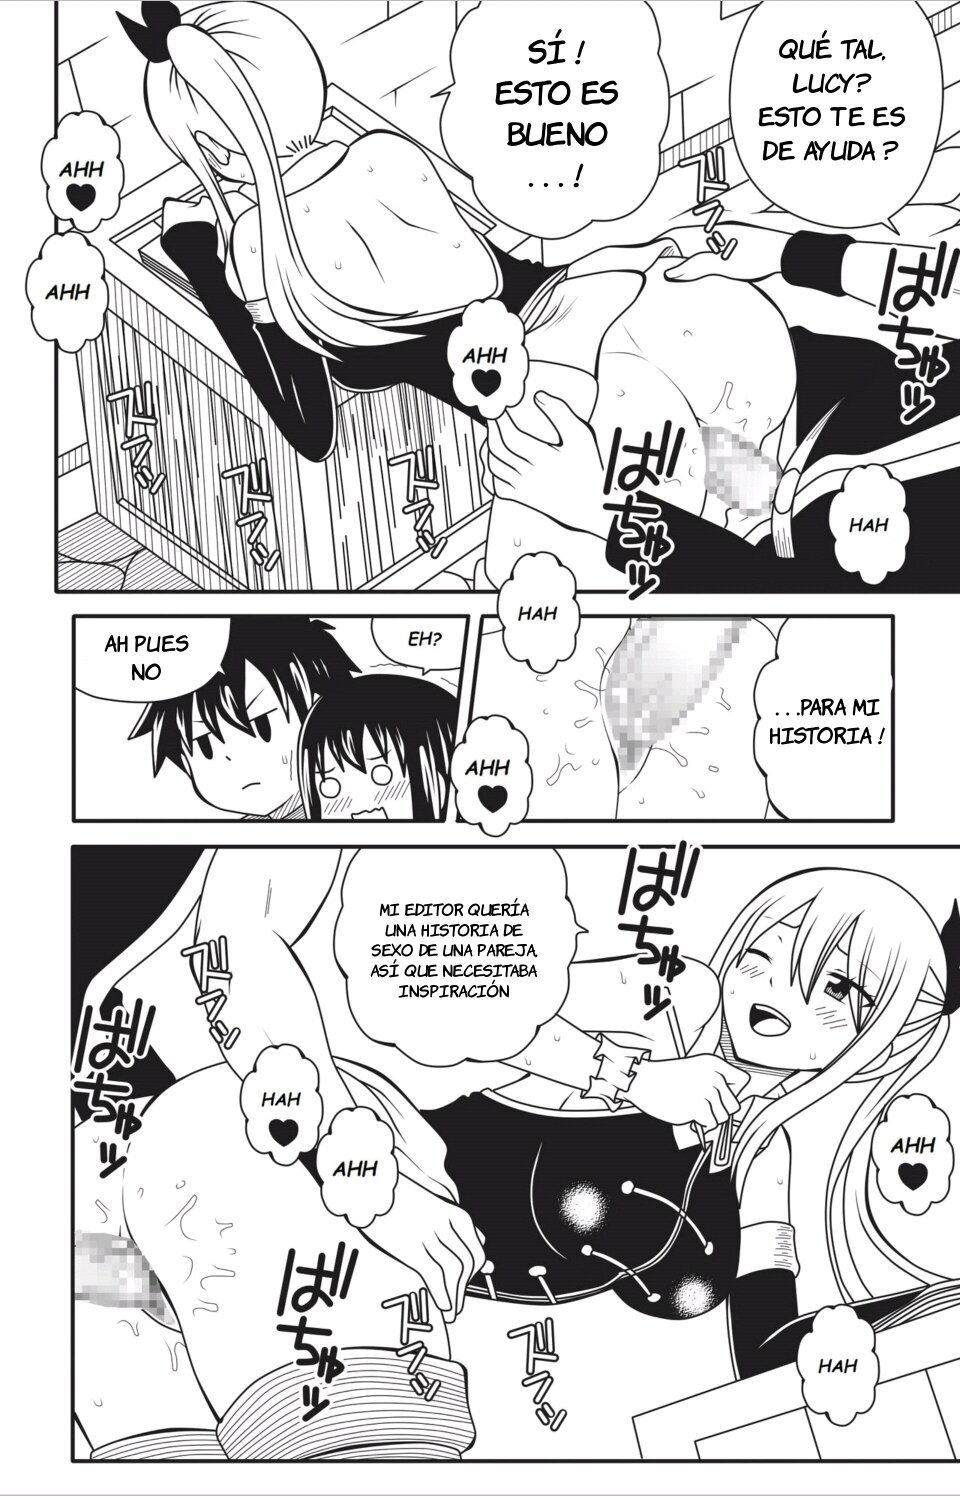 Fairy Tail H Quest Remake Omake 1 Natsu x Lucy - 2